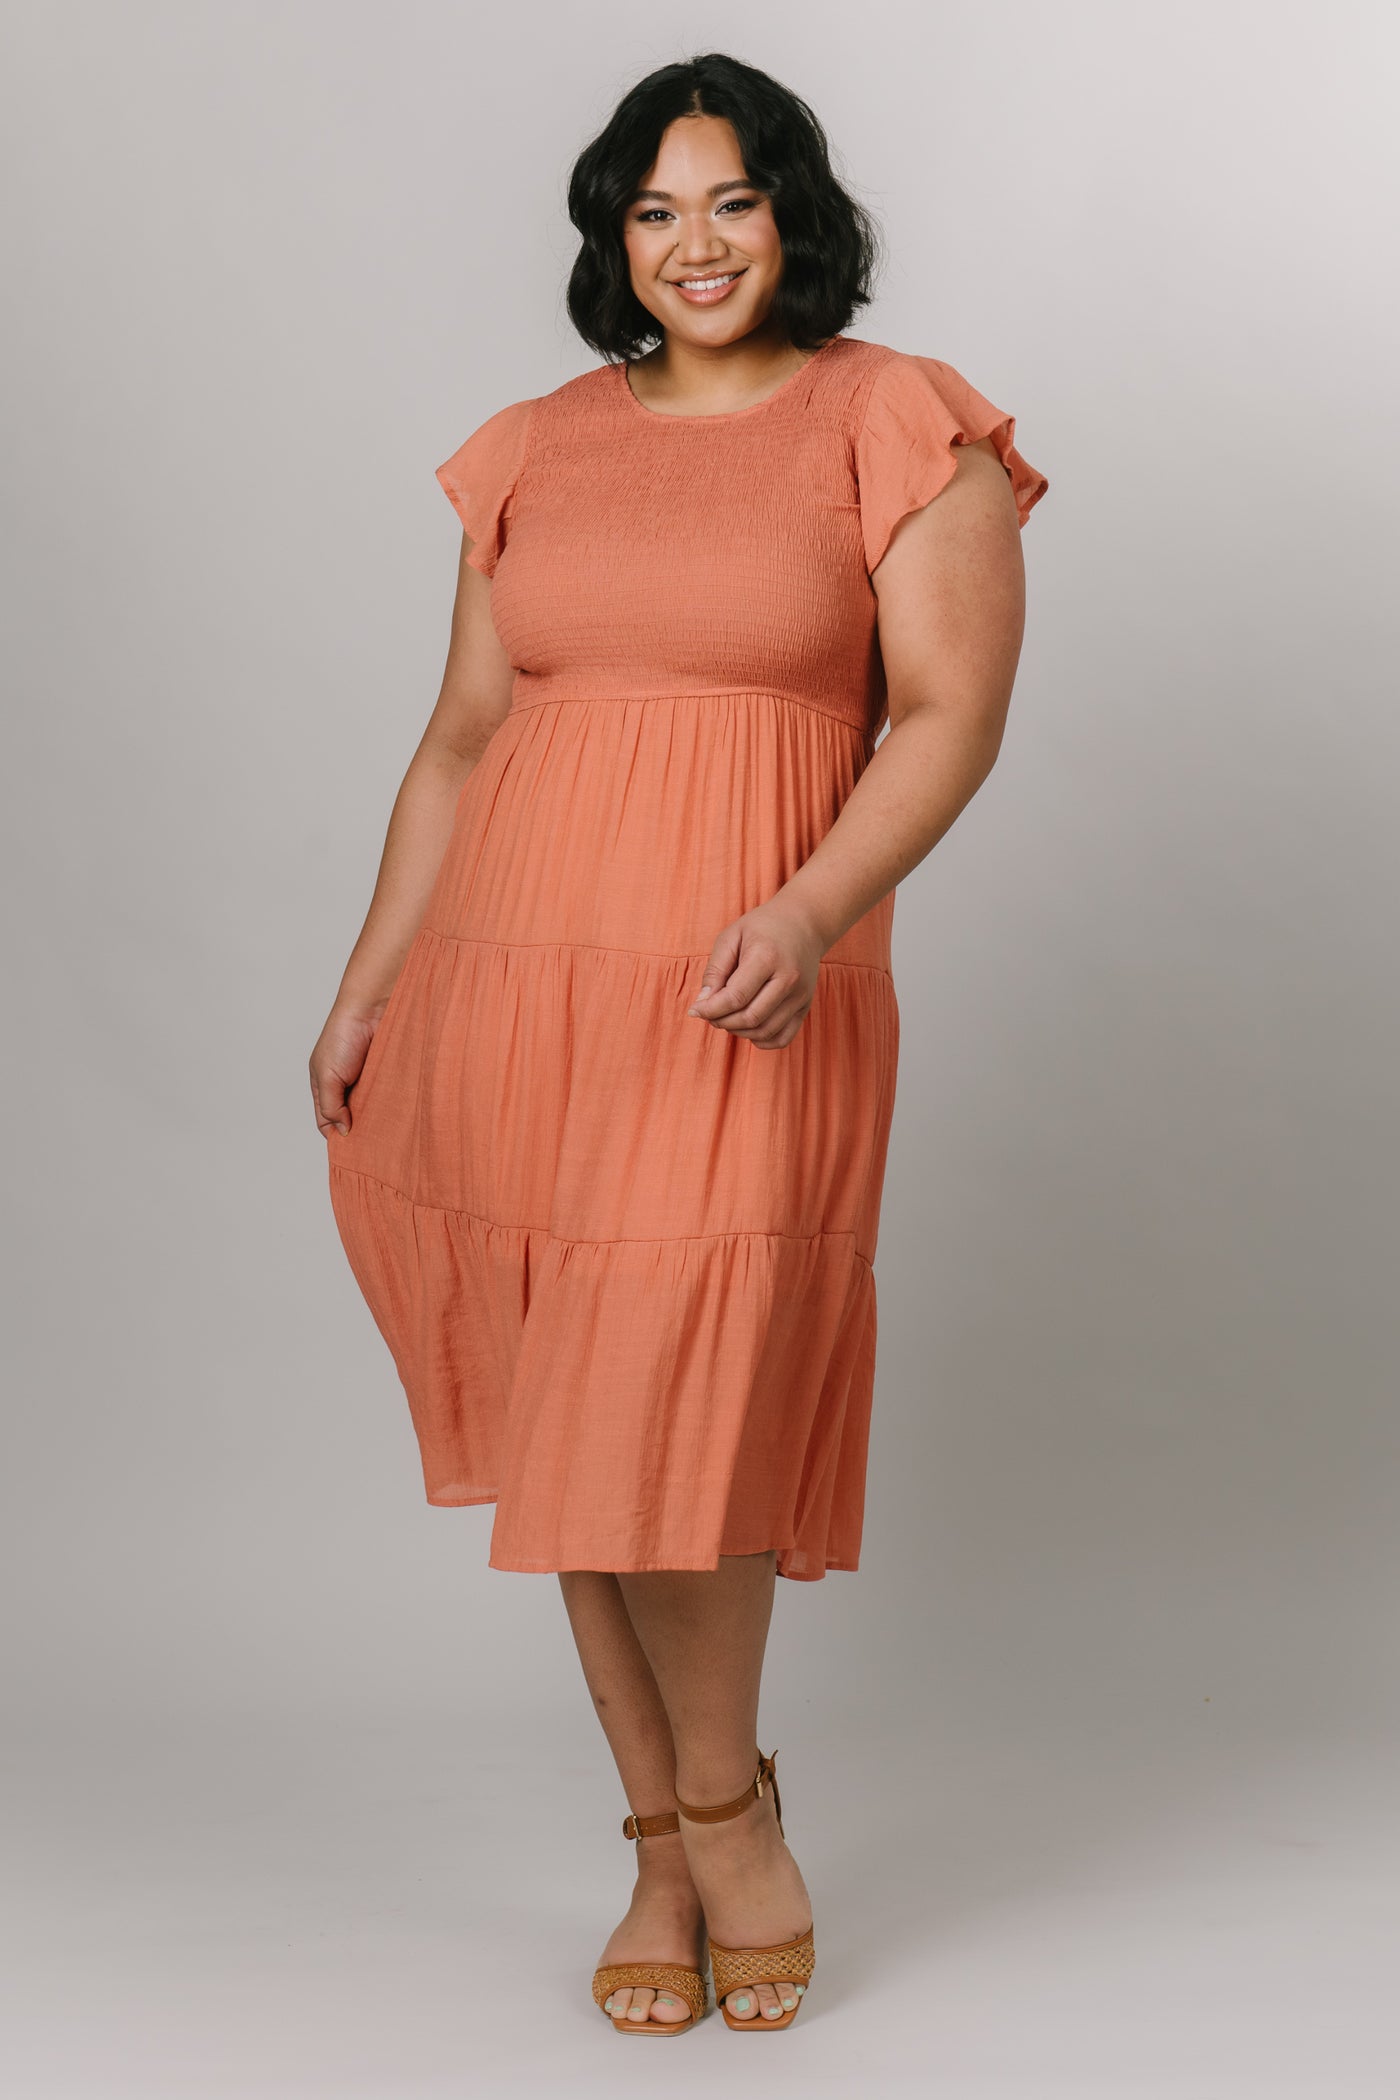 Plus size model in short sleeves dress with a smocked bodice and in the color dusty apricot. Modest Dresses - - Everyday Dresses - Modest Prom Dress - Formalwear Modest Dresses - Bridesmaid Modest Dresses.